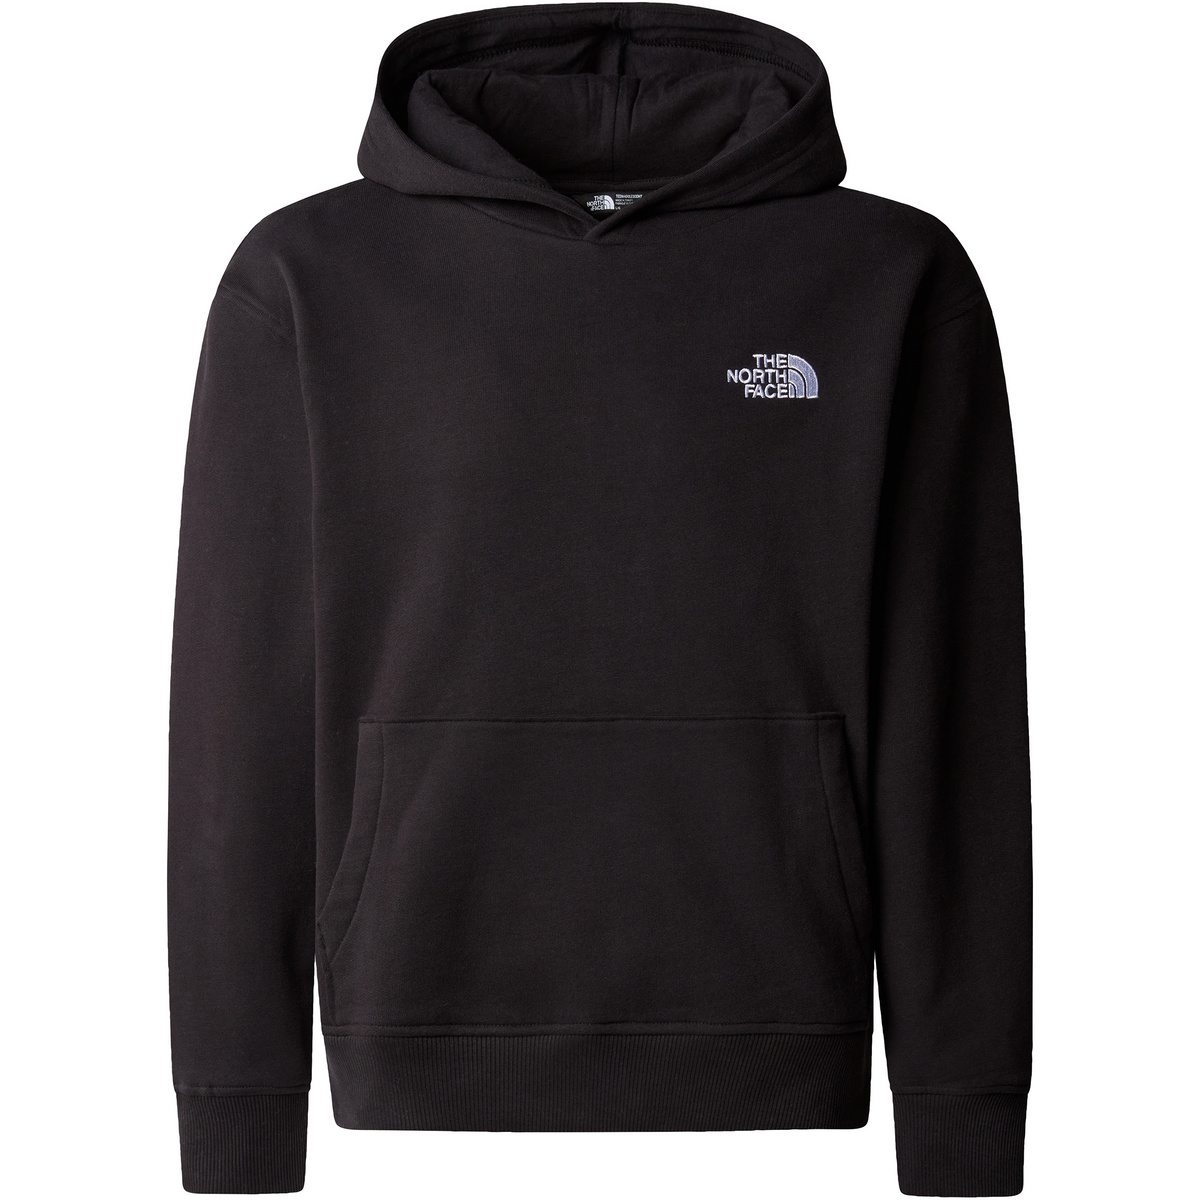 The North Face Kinder Oversized Hoodie von The North Face